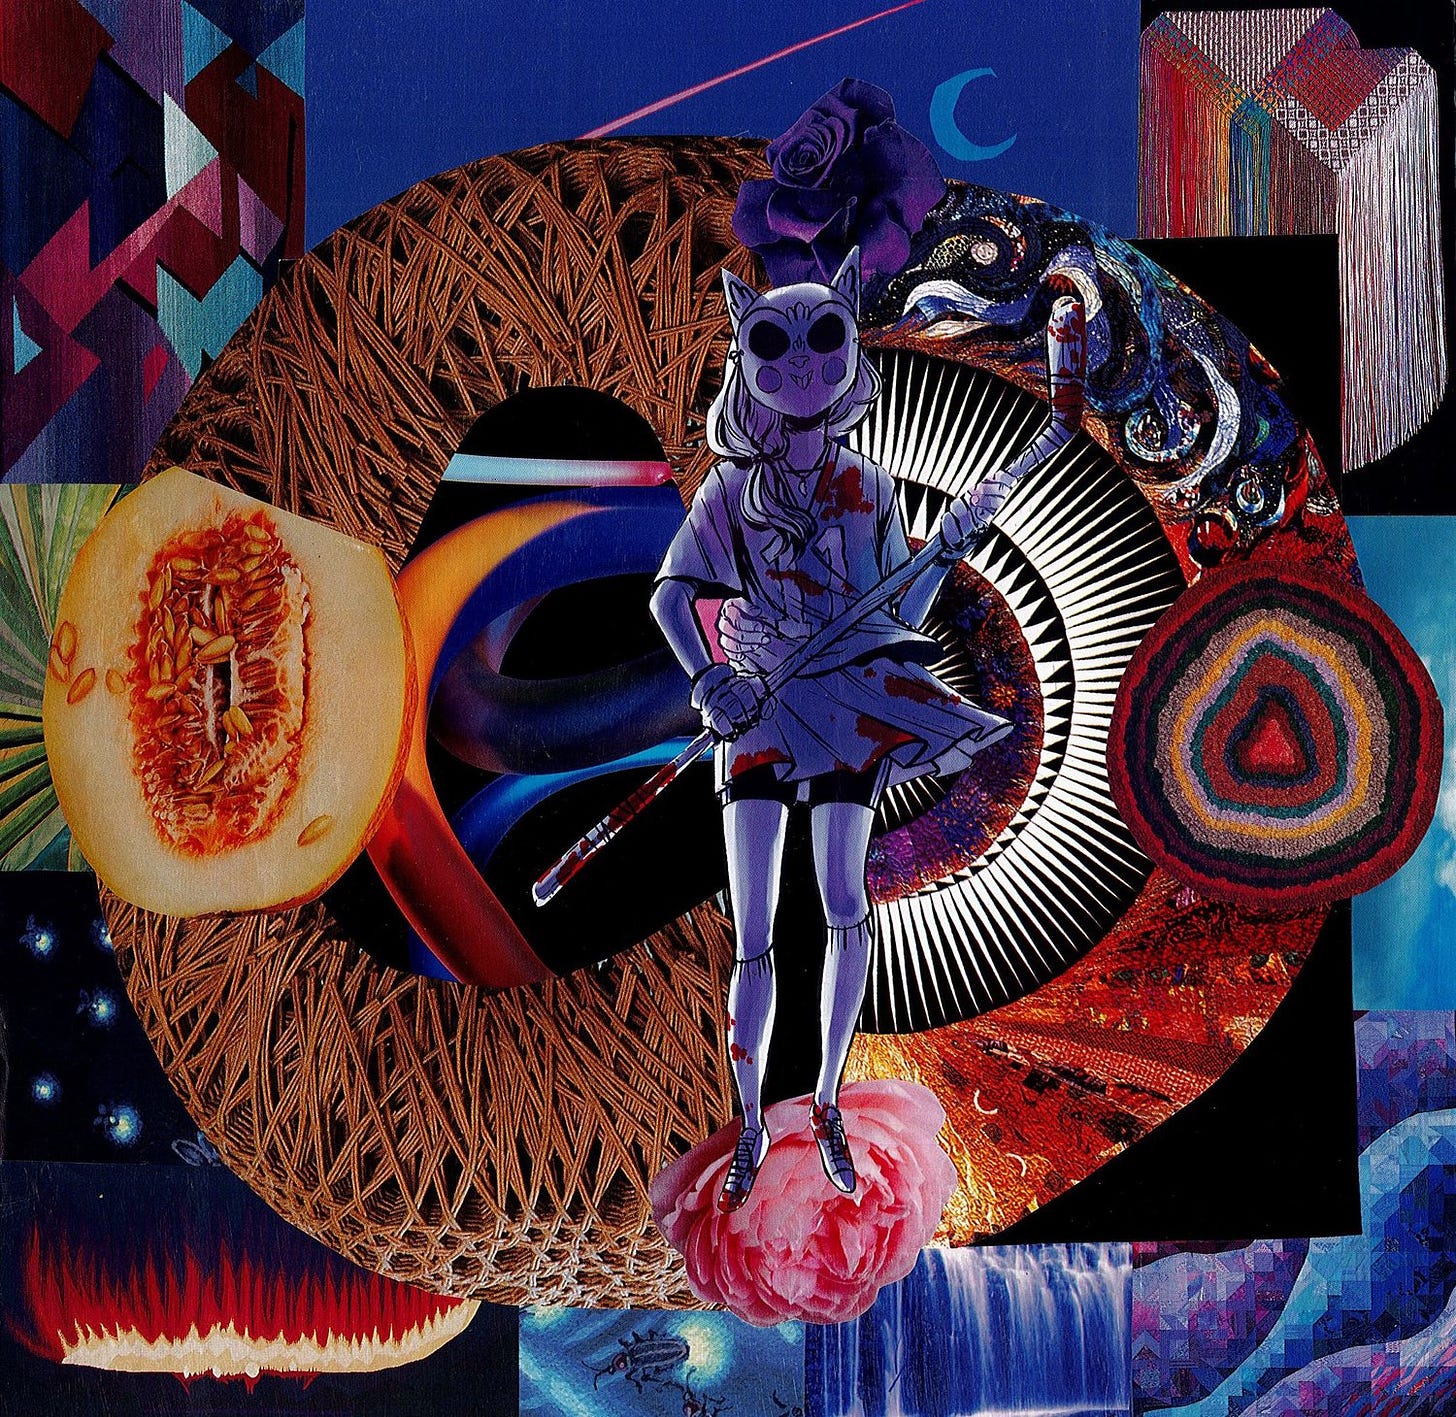 A girl in anime style wearing a cat mask and holding a bloody hockey stick. She is in front of an abstract portal shape and surrounded by collaged pieces representing the 4 elements in each corner.